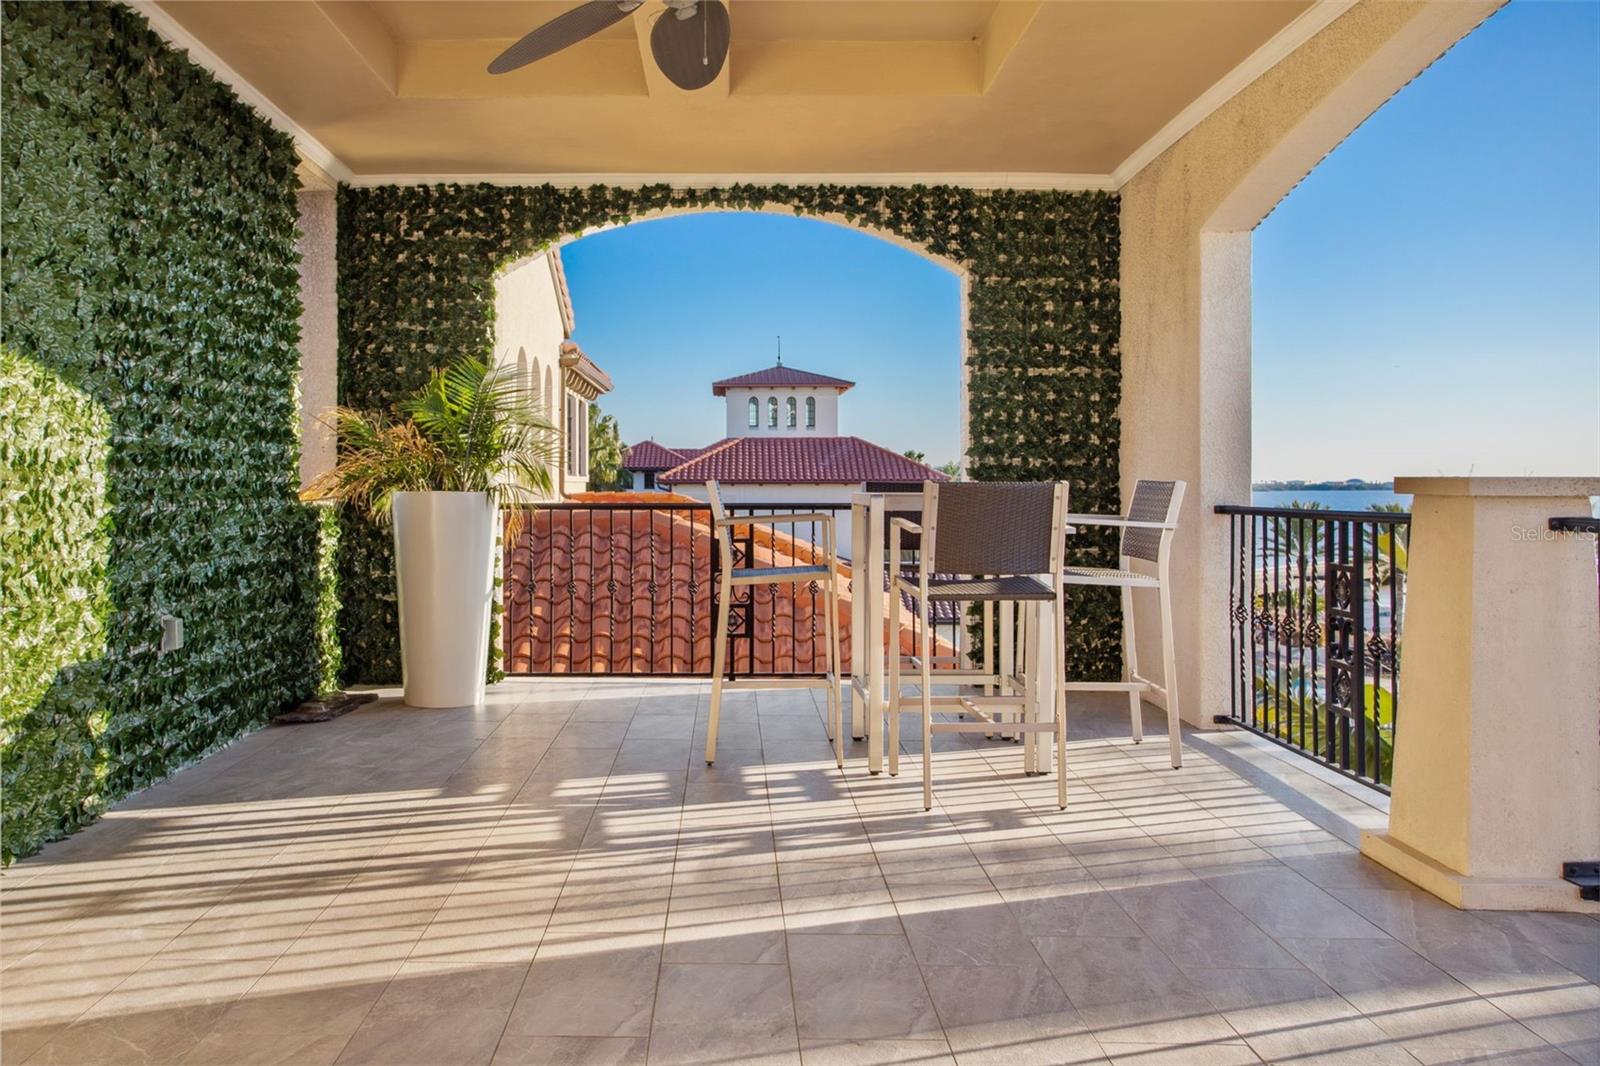 Expansive third floor balcony designed with entertainment in mind.